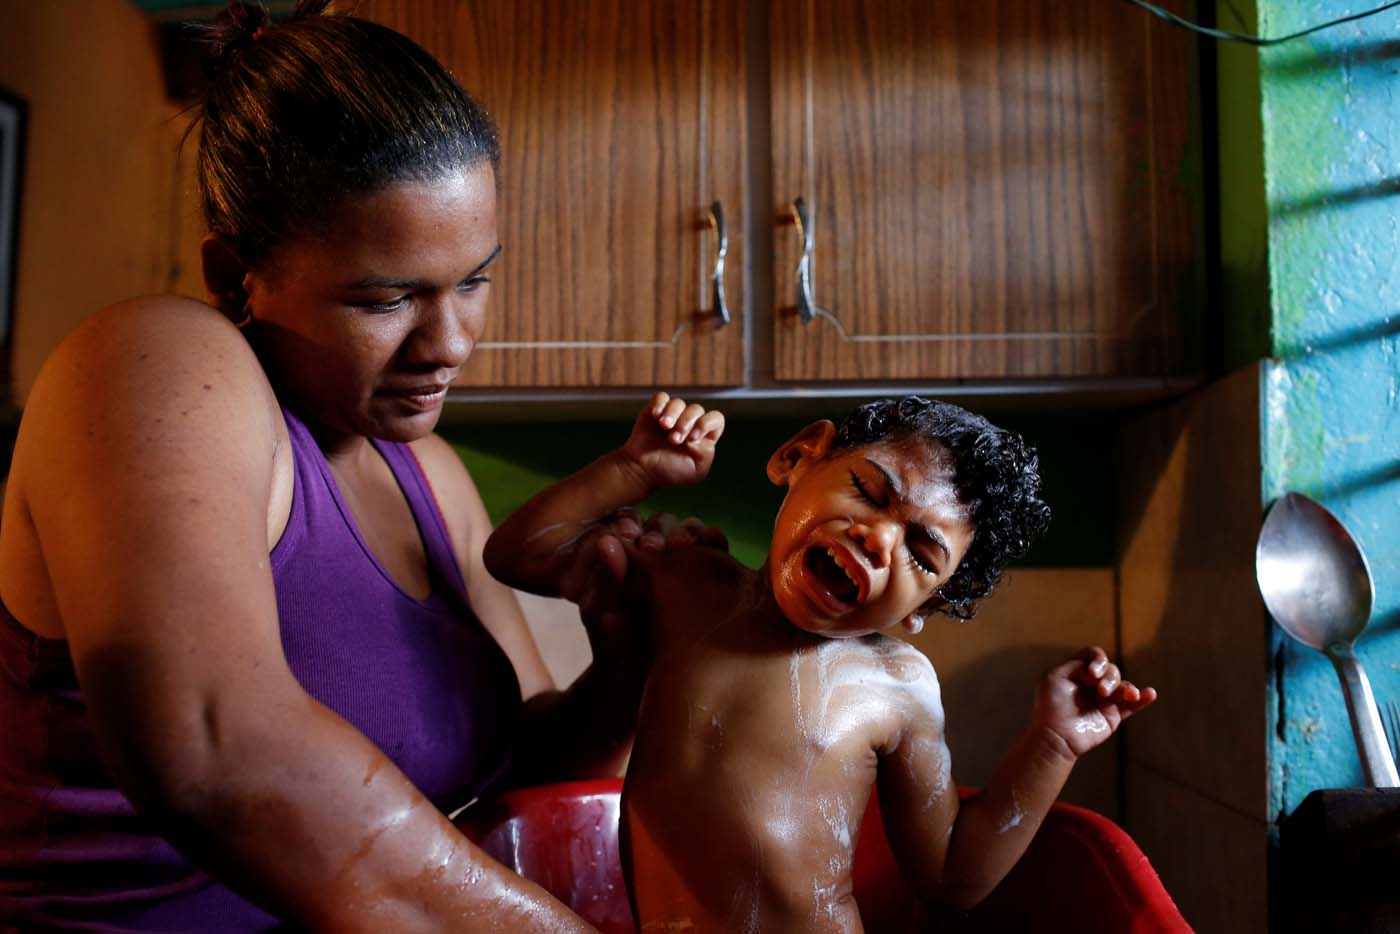 Tatiana Rocha, baths her son Kaleth Heredia, 2, a neurological patient being treated with anticonvulsants, at their house in Caracas, Venezuela February 8, 2017. REUTERS/Carlos Garcia Rawlins  TPX IMAGES OF THE DAY     SEARCH "EPILEPSY CARACAS" FOR THIS STORY. SEARCH "WIDER IMAGE" FOR ALL STORIES.